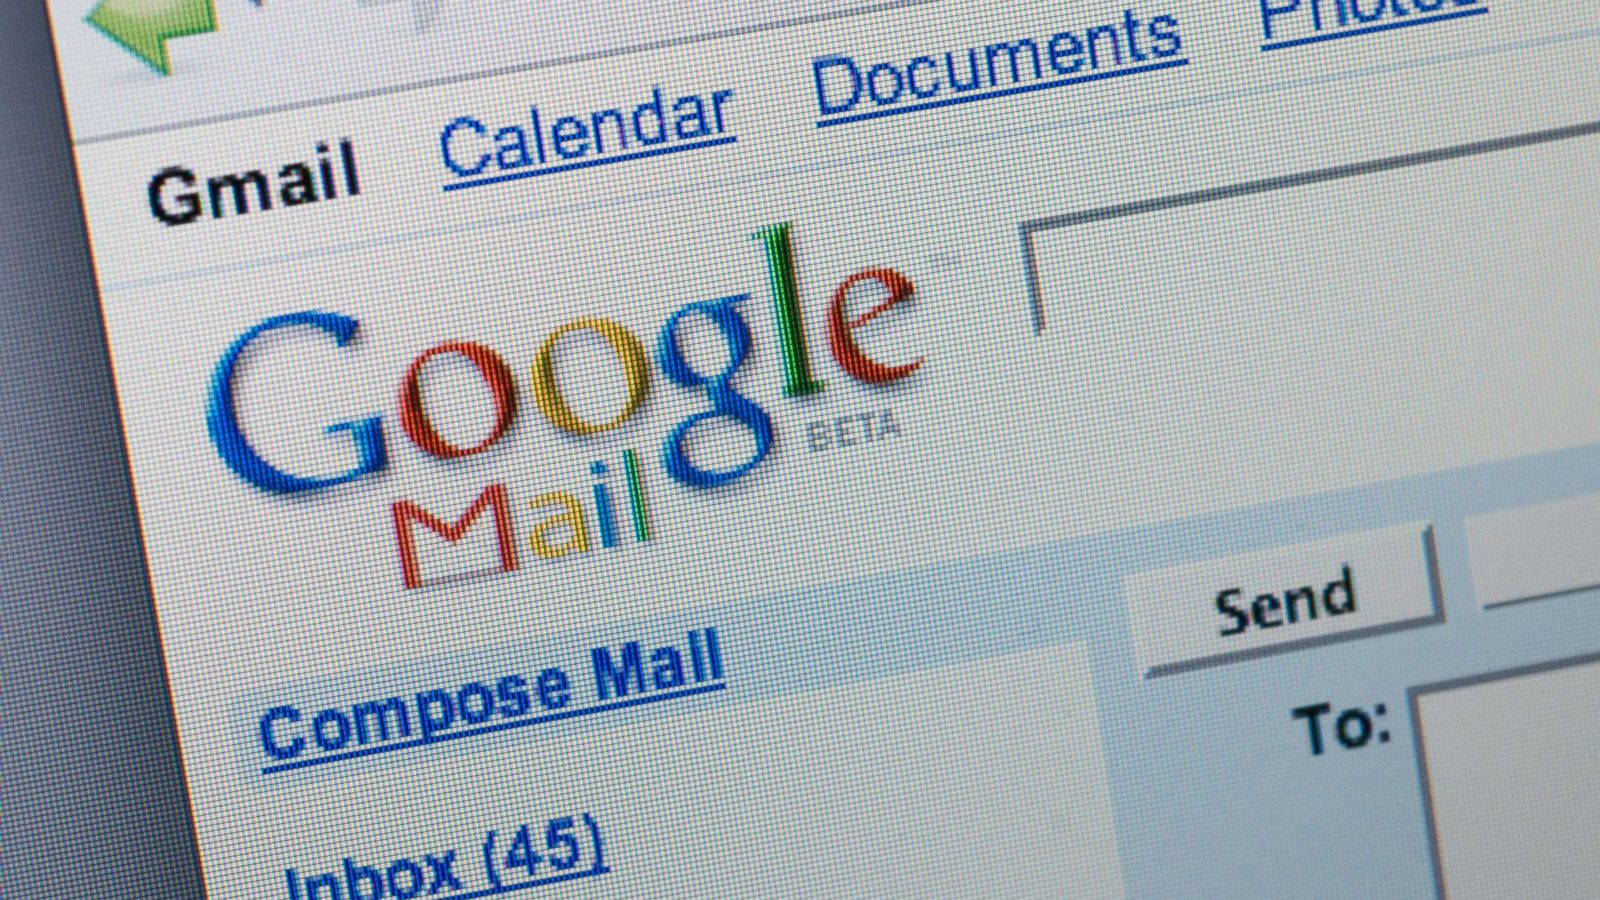 With new security and intelligent features, the new Gmail means business